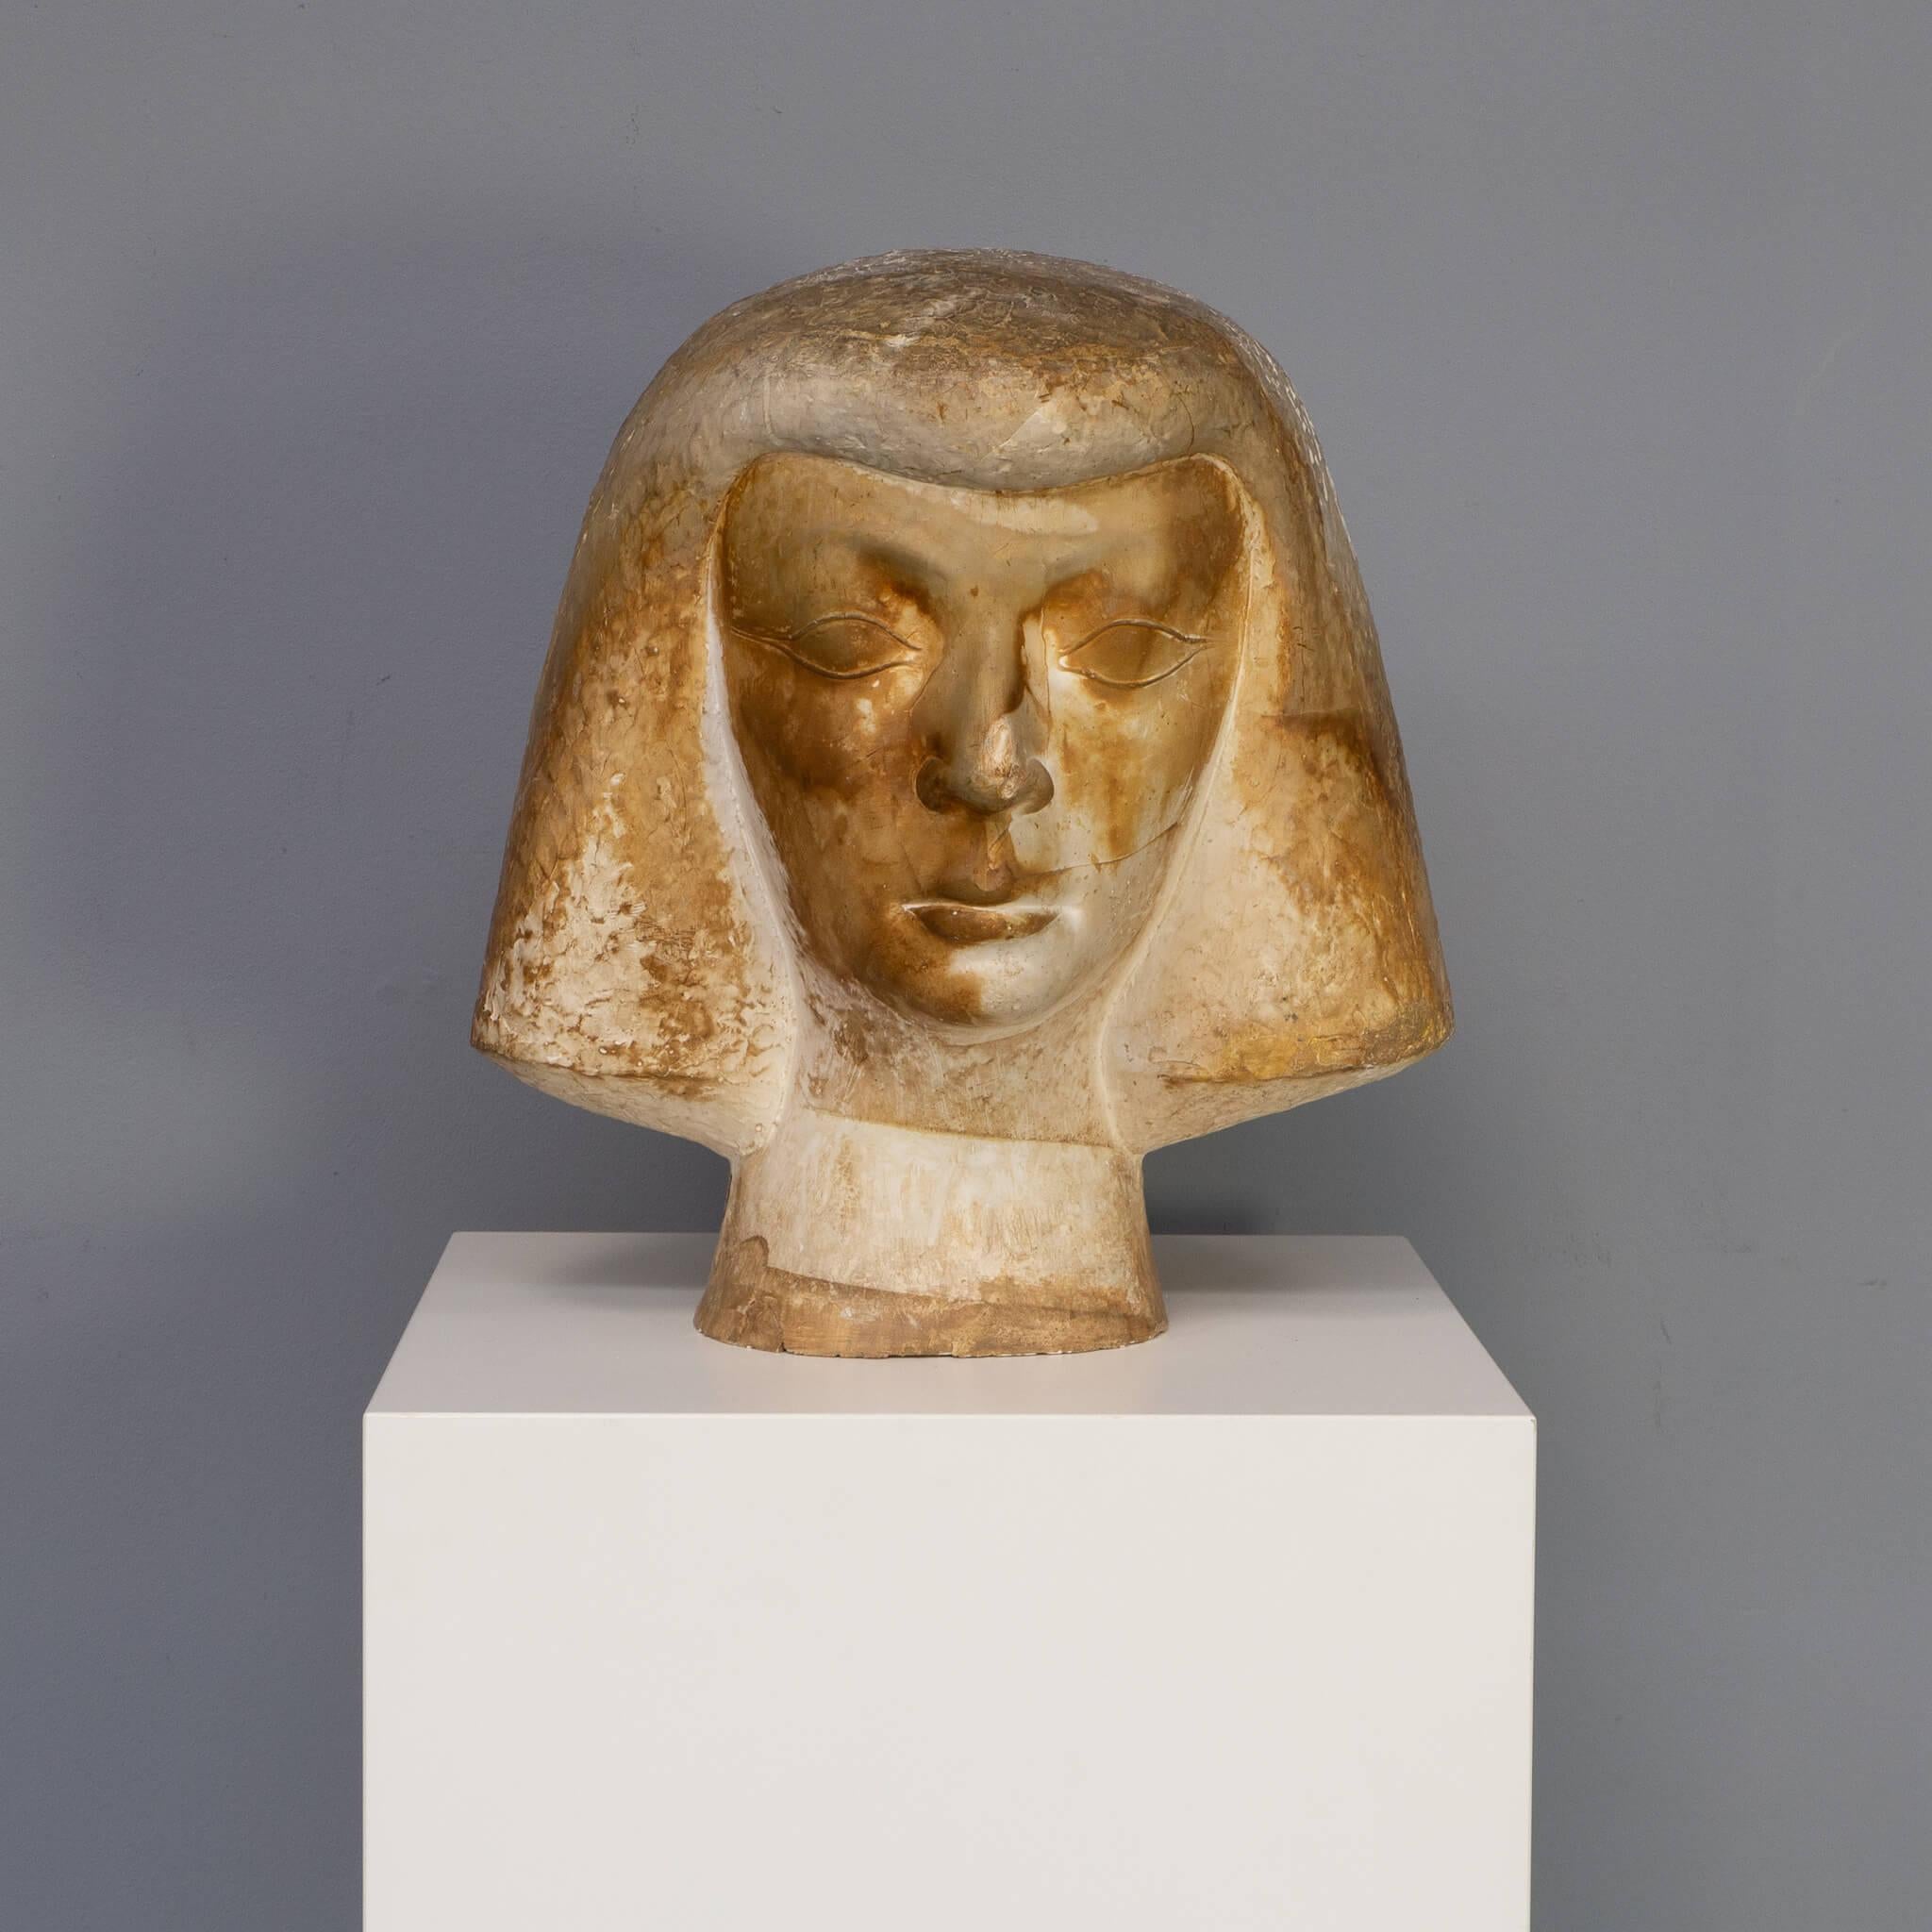 From a gallery in Nice Cannes France this large head has a signature of Aoussauti. Very little is to find about this signature but for sure this is a unique masterpiece. It is a beautiful large sculpture in french plaster with lots of bronze